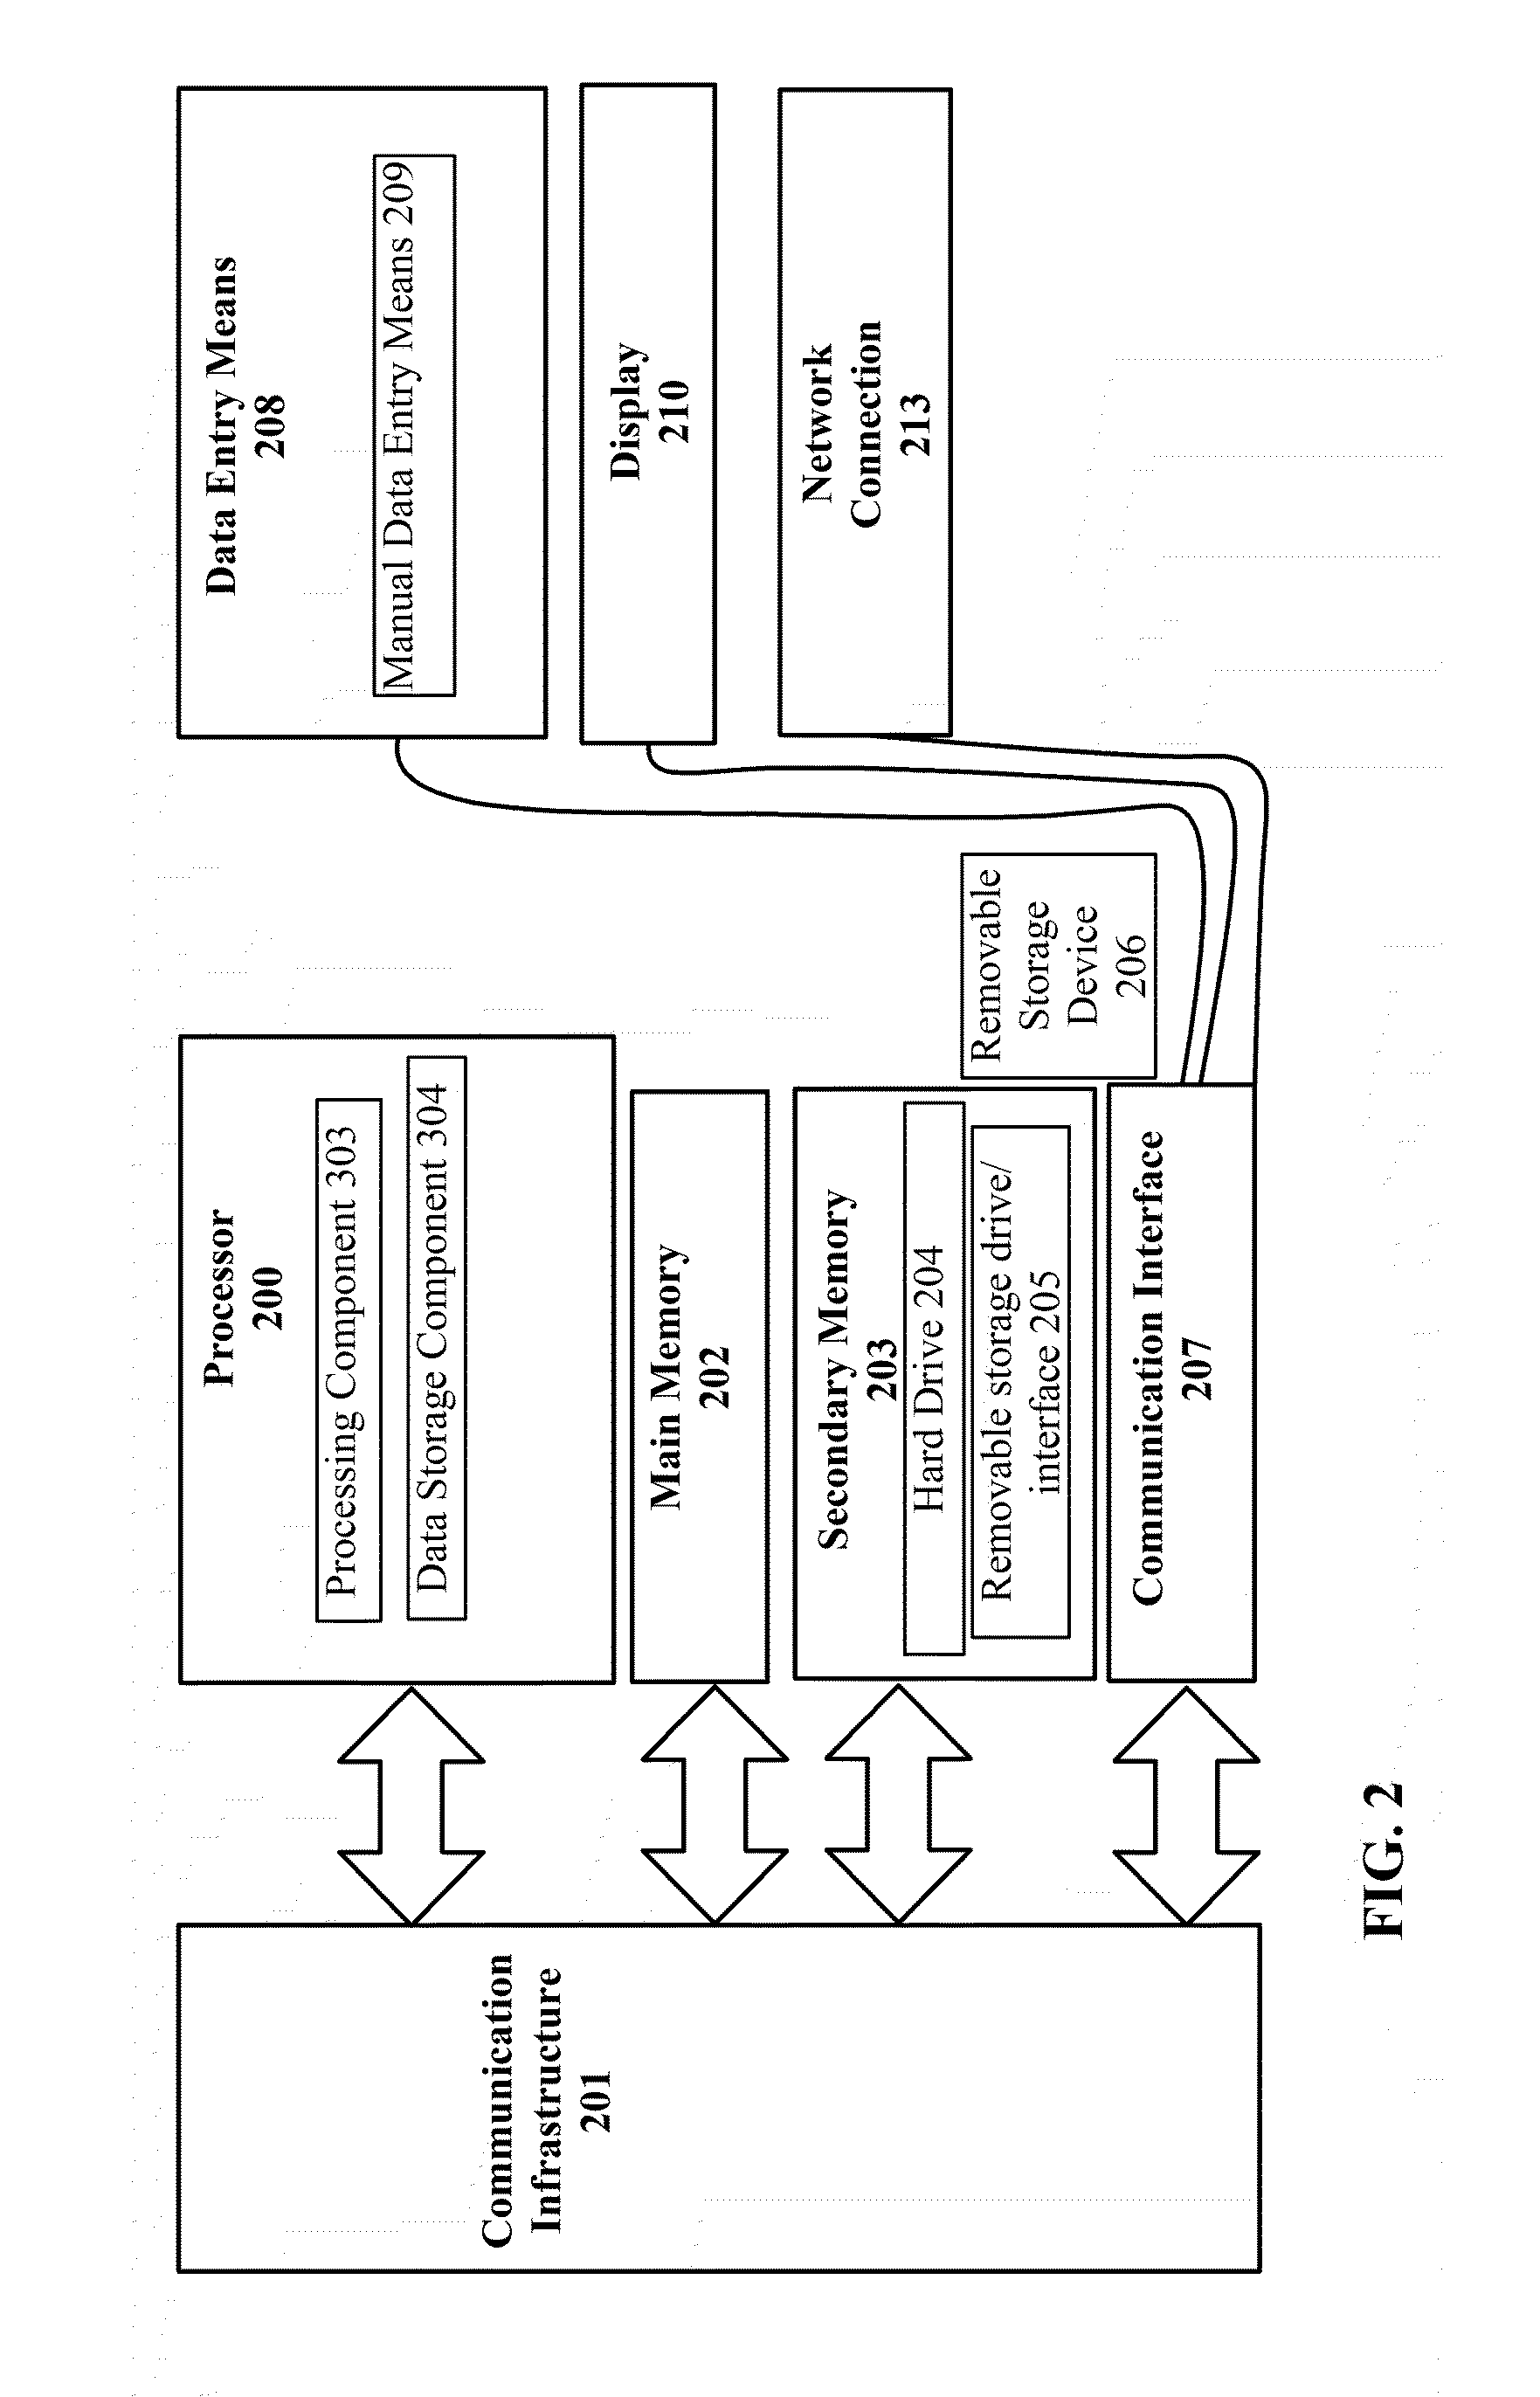 Method and system for converting document sets to term-association vector spaces on demand